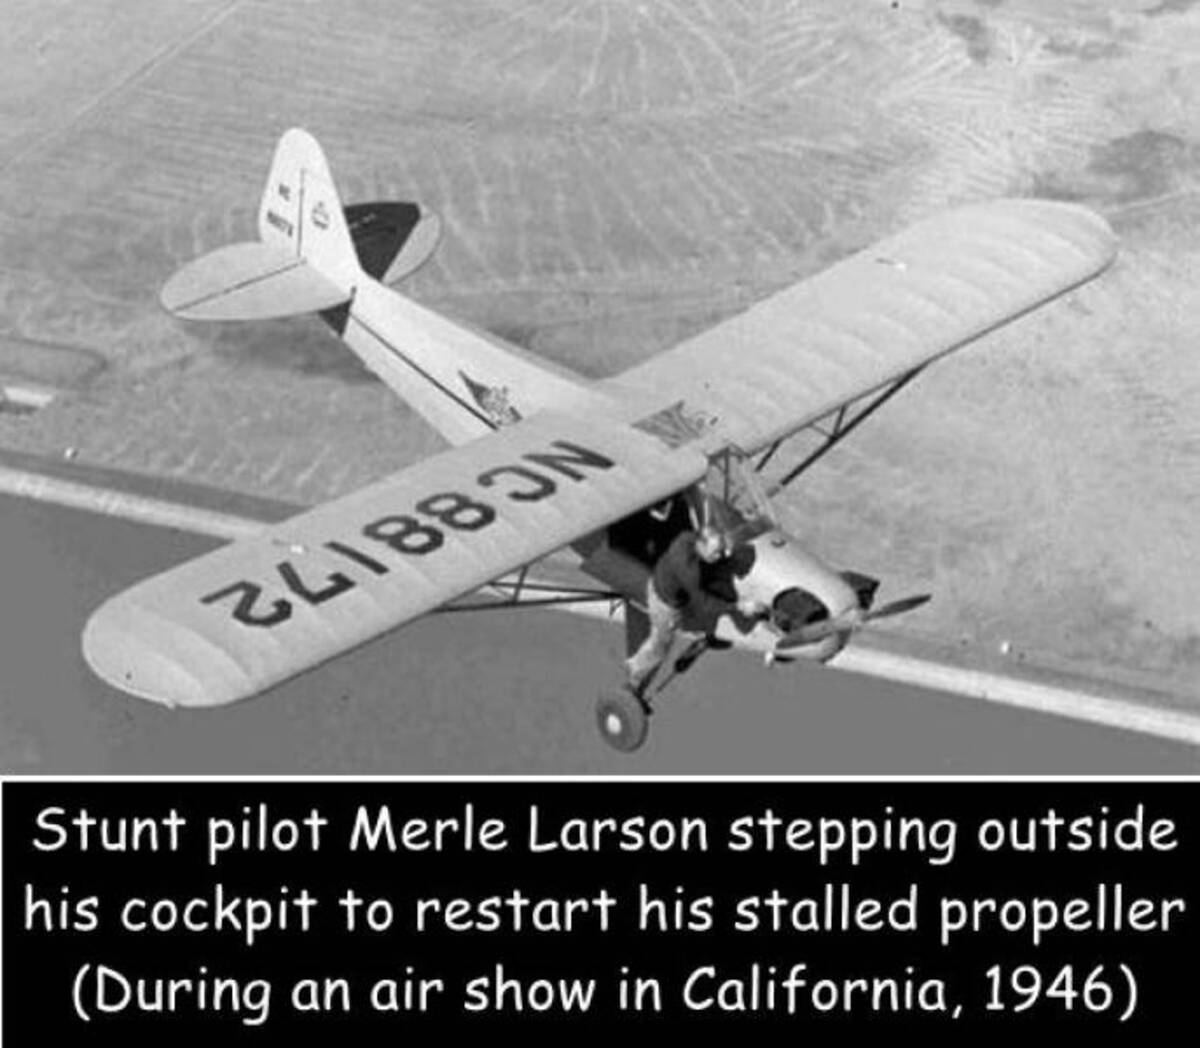 fixing plane in flight - 24188 On We Stunt pilot Merle Larson stepping outside his cockpit to restart his stalled propeller During an air show in California, 1946